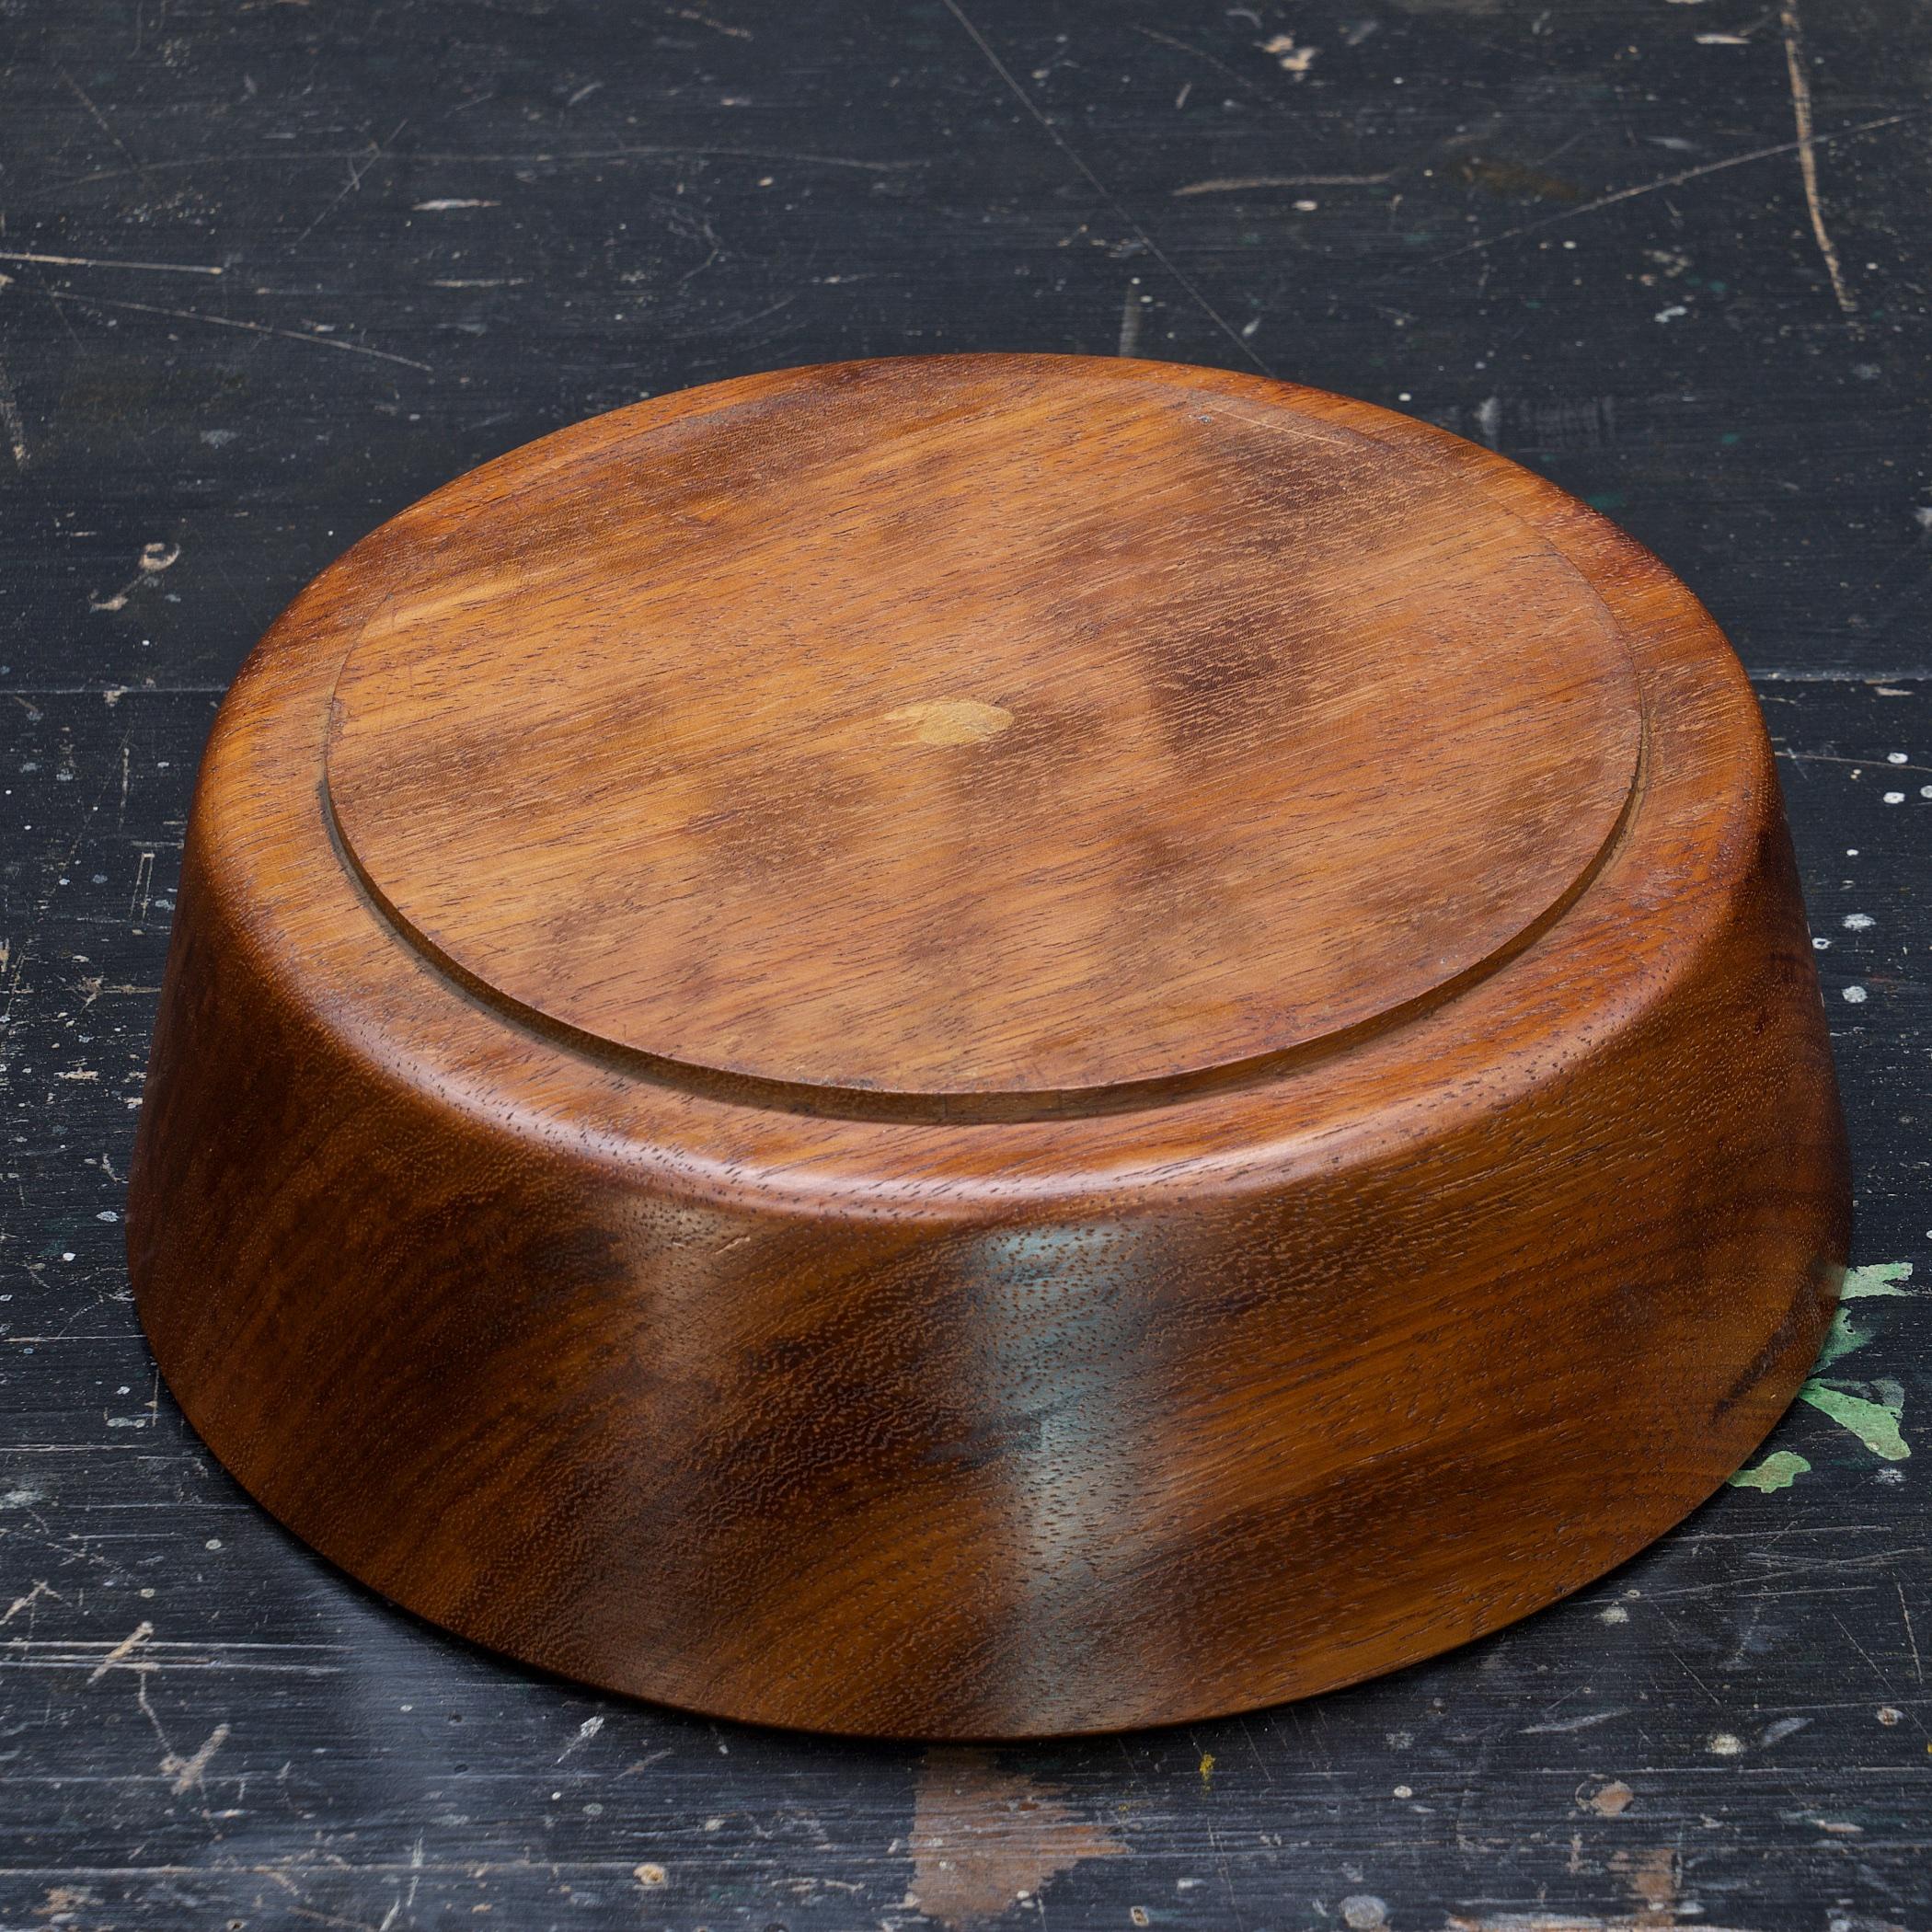 Mid-20th Century American Modern Turned Mahogany Wood Fruit Centerpiece Bowl  For Sale